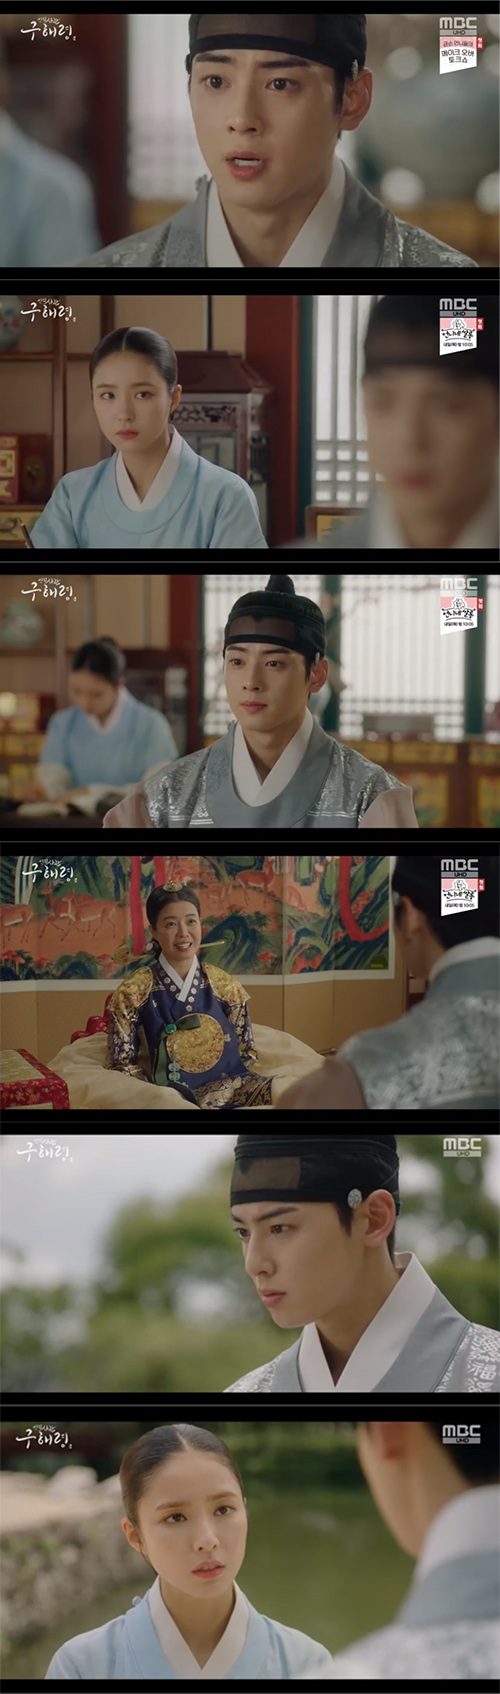 In the MBC drama The New Entrepreneur Rookie Historian Goo Hae-ryung, which was broadcast on the afternoon of the 4th, a shadow was drawn on the love front of Lee Rim (Cha Eun-woo) and Rookie Historian Goo Hae-ryung (Shin Se-kyung).On this day, Lee was looking at the house of Rookie Historian Goo Hae-ryung. Rookie Historian Goo Hae-ryung was surprised and said, It is only a place where the girls are.In the advent of Lee Rim, Rookie Historian Goo Hae-ryung hastily cleared the room.Irim looked around the room carefully, and Rookie Historian Goo Hae-ryung asked, Why are you so scoured, youre not new?Lee said, At that time, it was a Gussari room and now it is my GLOW room.Rookie Historian Goo Hae-ryung said, Are you planning today? And Irim said, What if you have decided. I want to see it every day.I do not have a priest or a coroner, he said, wrapping his waist and hugging him.Minbonggyo (Lee Ji-hoon) filed an impeachment appeal of sex censorship (Ji Gun-woo) for the reason of the disclosure of the contents of the rebuke.But he did not know what he had said. Minbonggyo strongly expressed to his angry colleagues, The fact that sex censorship was guilty is unchanged.Lee Rim and Rookie Historian Goo Hae-ryung, who continued their sweet secret love, went on a date for the sparsely populated sperm.At the end of the day, Oh Eun-im (Lee Ye-rim) and Hearan (Jang Yu-bin) were resting for a while.When did you two meet? He said, Did you even hold your hand and kiss it?Rookie Historian Goo Hae-ryung said, It never happened, but Irim said, I did it.Rookie Historian Goo Hae-ryung has already been in the country, so please do not take the dinner, but just leave the work.At this time, the Nine of the Green Sea also overheard the conversation, and Rookie Historian Goo Hae-ryung picked up our Sejo of Joseon.I have such a pretty face, and all the men would have been laughing. Oh Eun-im and Hurran said, Sejo of Joseon is a good-looking man even if you look at it sideways.Its good to have a colleague who can now talk about Sejo of Joseon, said Rookie Historian Goo Hae-ryung, who caught secret love.Irim also expressed his affection more actively to Rookie Historian Goo Hae-ryung.The name kissed Rookie Historian Goo Hae-ryungs mouth.Although the relationship between the two was ripe, Lee Tae (Kim Min-sang) prepared for the wedding of Sejo of Joseon.However, he said, I allowed the Wedding Bible of the city, but I do not intend to leave it to the master.Heo Sam-bo (Sung Ji-ru) informed Irim immediately of this fact: We set up a ritual service in the royal family because of the unmarried Taoyuan, who is full of horns, and prepare for Wedding Bible.Rookie Historian Goo Hae-ryung heard this, and left the post saying I am reducing it; Irim followed, and said, I dont marry anyone.If youre the same as me, said Rookie Historian Goo Hae-ryung, but the price of my heart is to live as a lady for the rest of my life.Lee went to see the presbytery and took Rookie Historian Goo Hae-ryung to meet Mr. Lim.I already have a GLOW in my mind, said Lee. I love it so deeply that I do not want it or anyone else.Cha Eun-woo and Shin Se-kyung were proud of their devotion to the people of the court and the people of the court, and they grew up in earnest, but they were met by Danger, who had to break up with the Wedding Bible hosted by the royal family.Fortunately, Cha Eun-woo is courageous to Confessions my love, and it stimulates the curiosity that the two can complete the romance by crossing the identity difference of Sejo of Joseon and the officer.Photo  MBC Broadcasting Screen